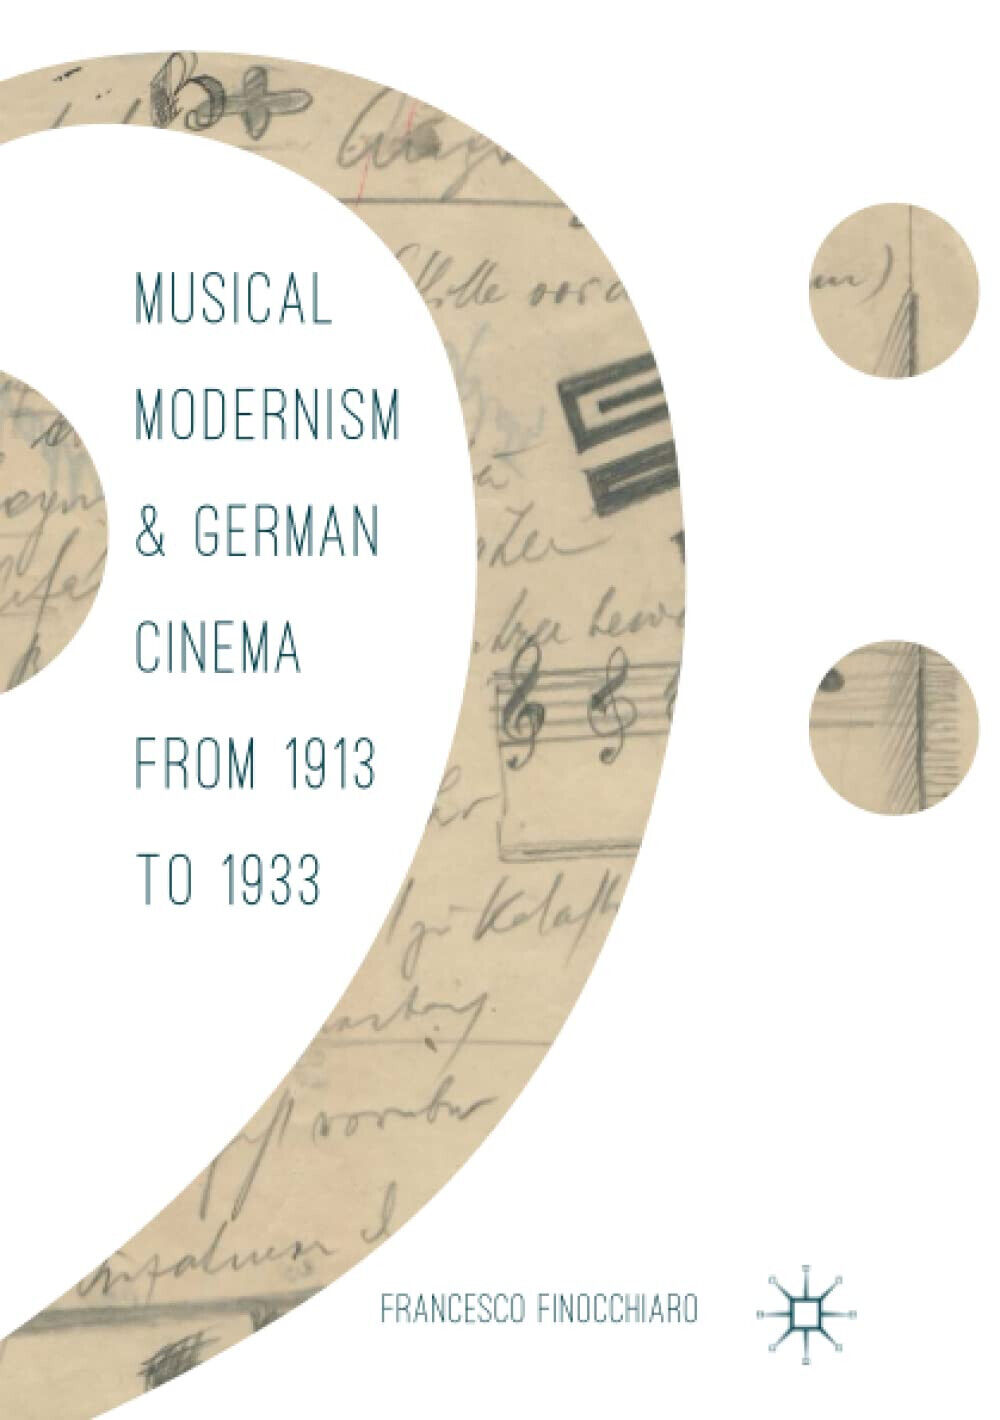 Musical Modernism and German Cinema from 1913 to 1933